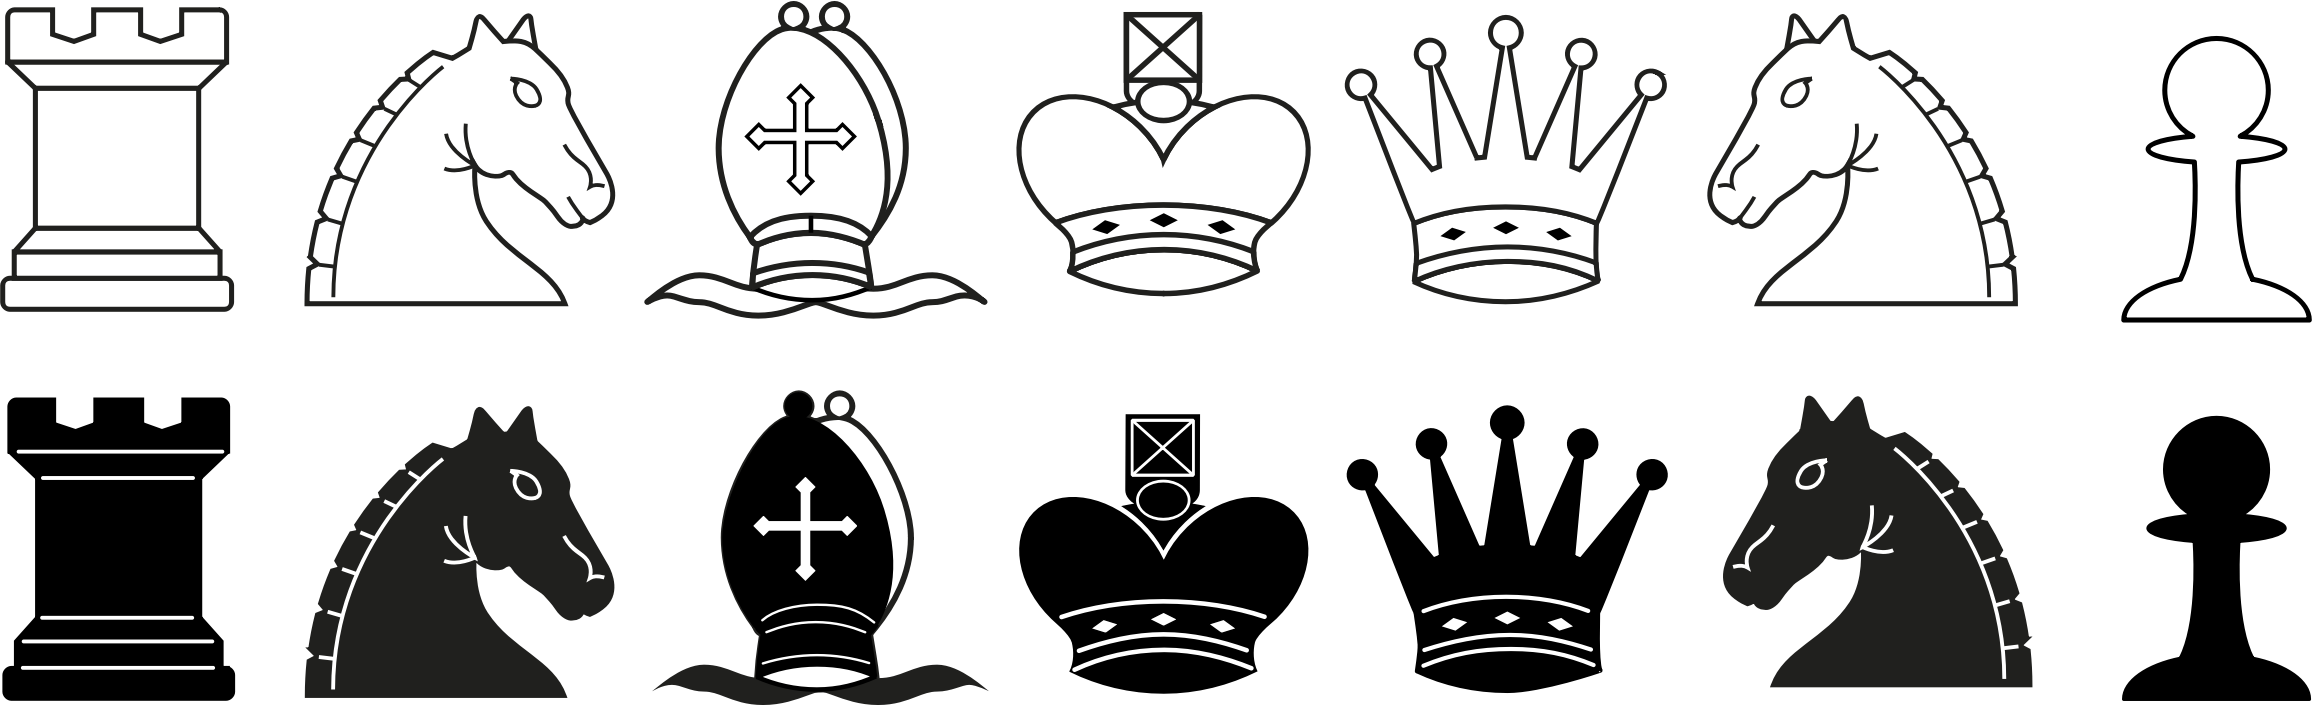 black-chess-pieces-silhouette